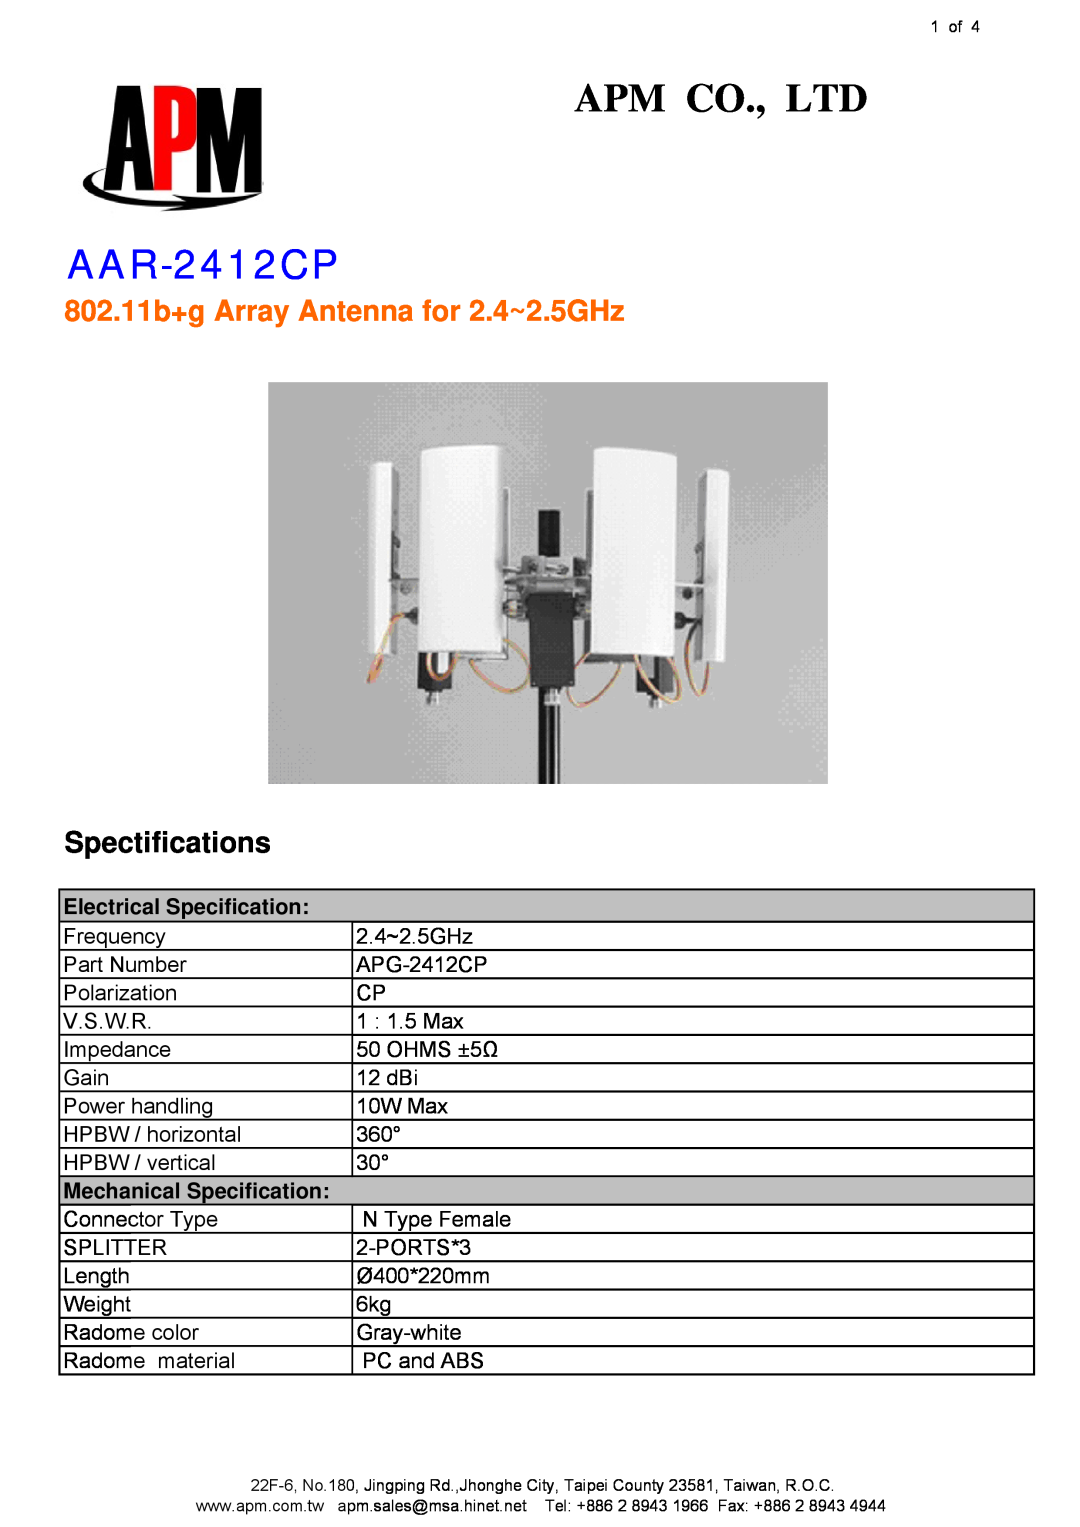 APM AAR-2412CP manual 802.11b+g Array Antenna for 2.4~2.5GHz, Spectifications, Electrical Specification 